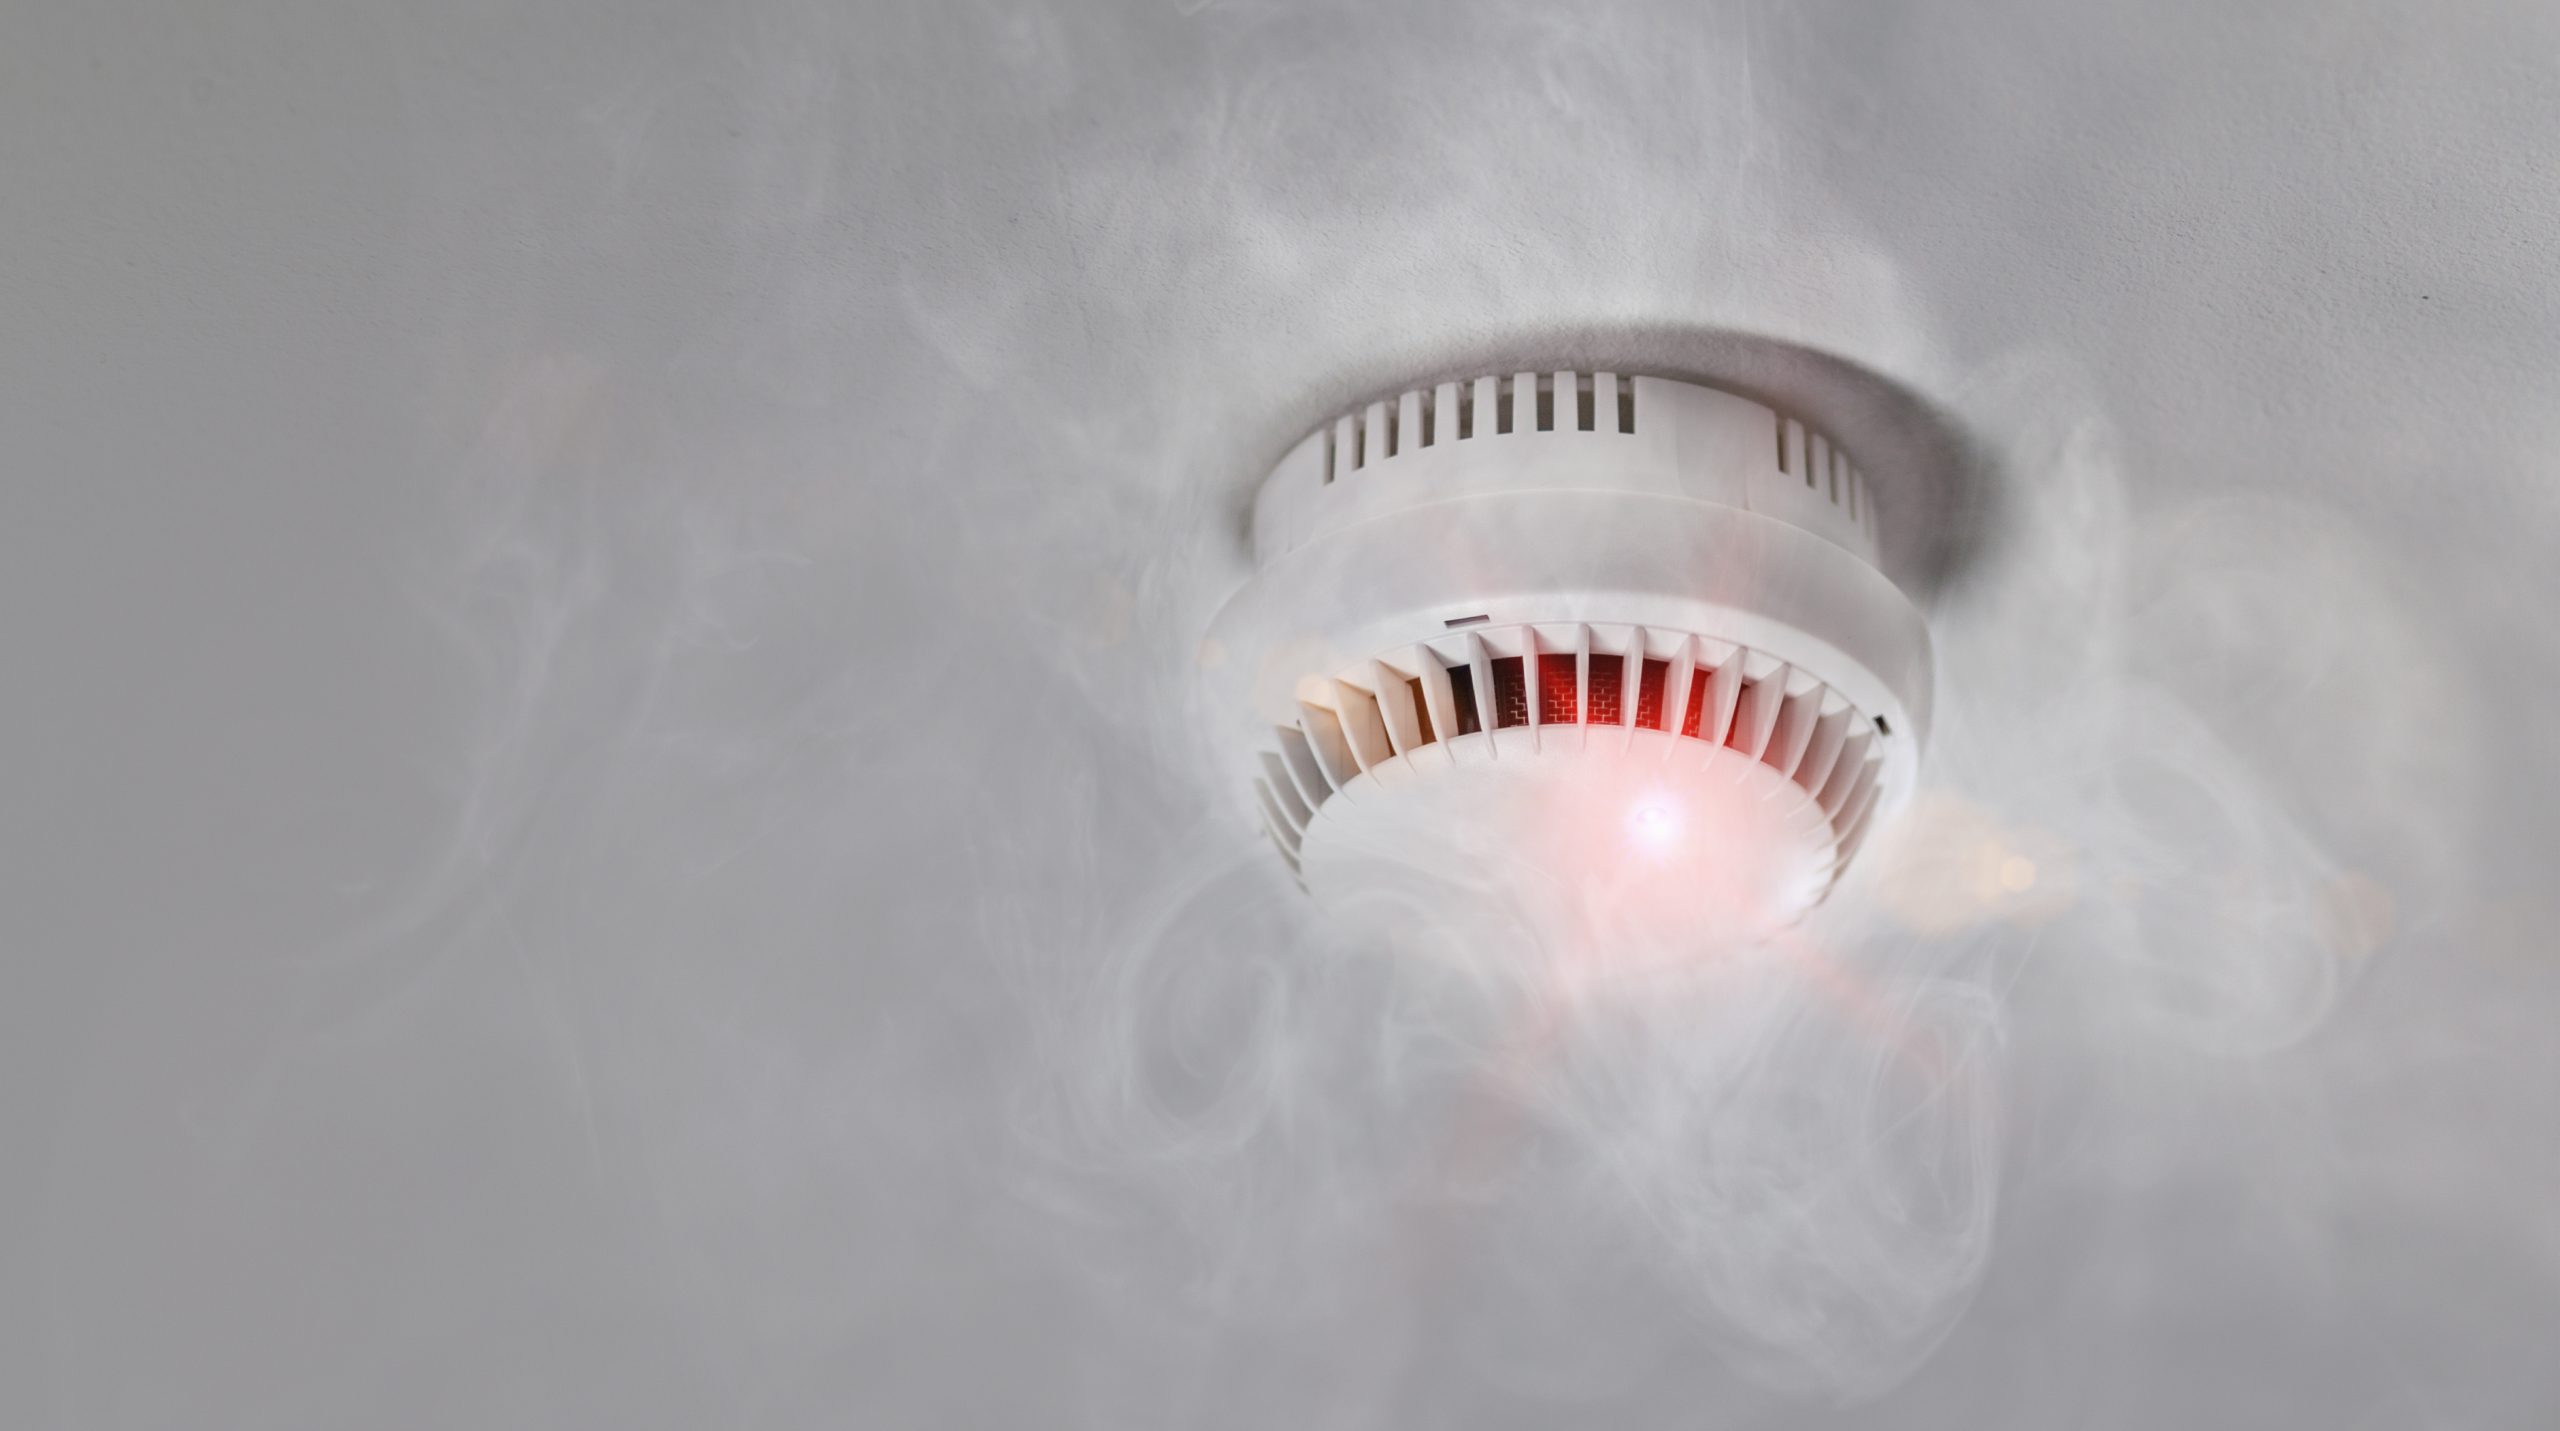 Overview of Fire Safety Regulations in the Philippines: Importance of Fire Detection and Alarm Systems